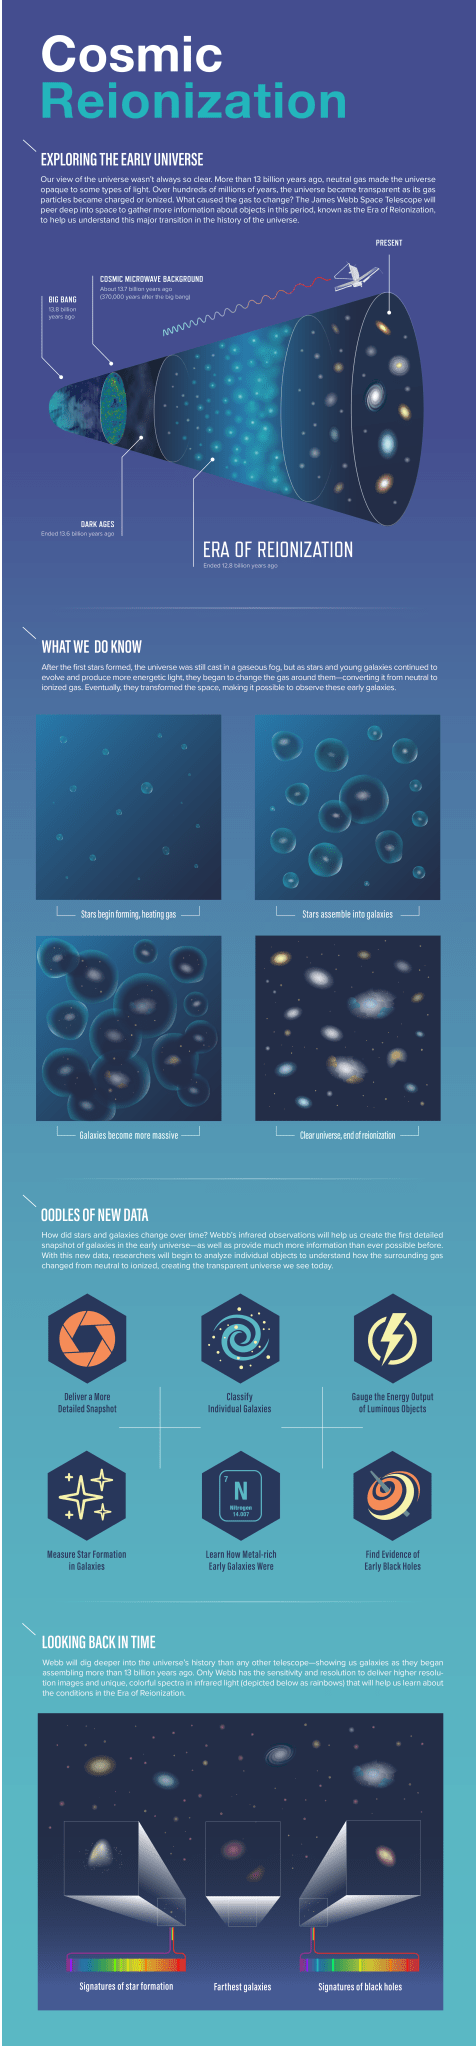 Graphic showing the Era of Reionization of the universe.